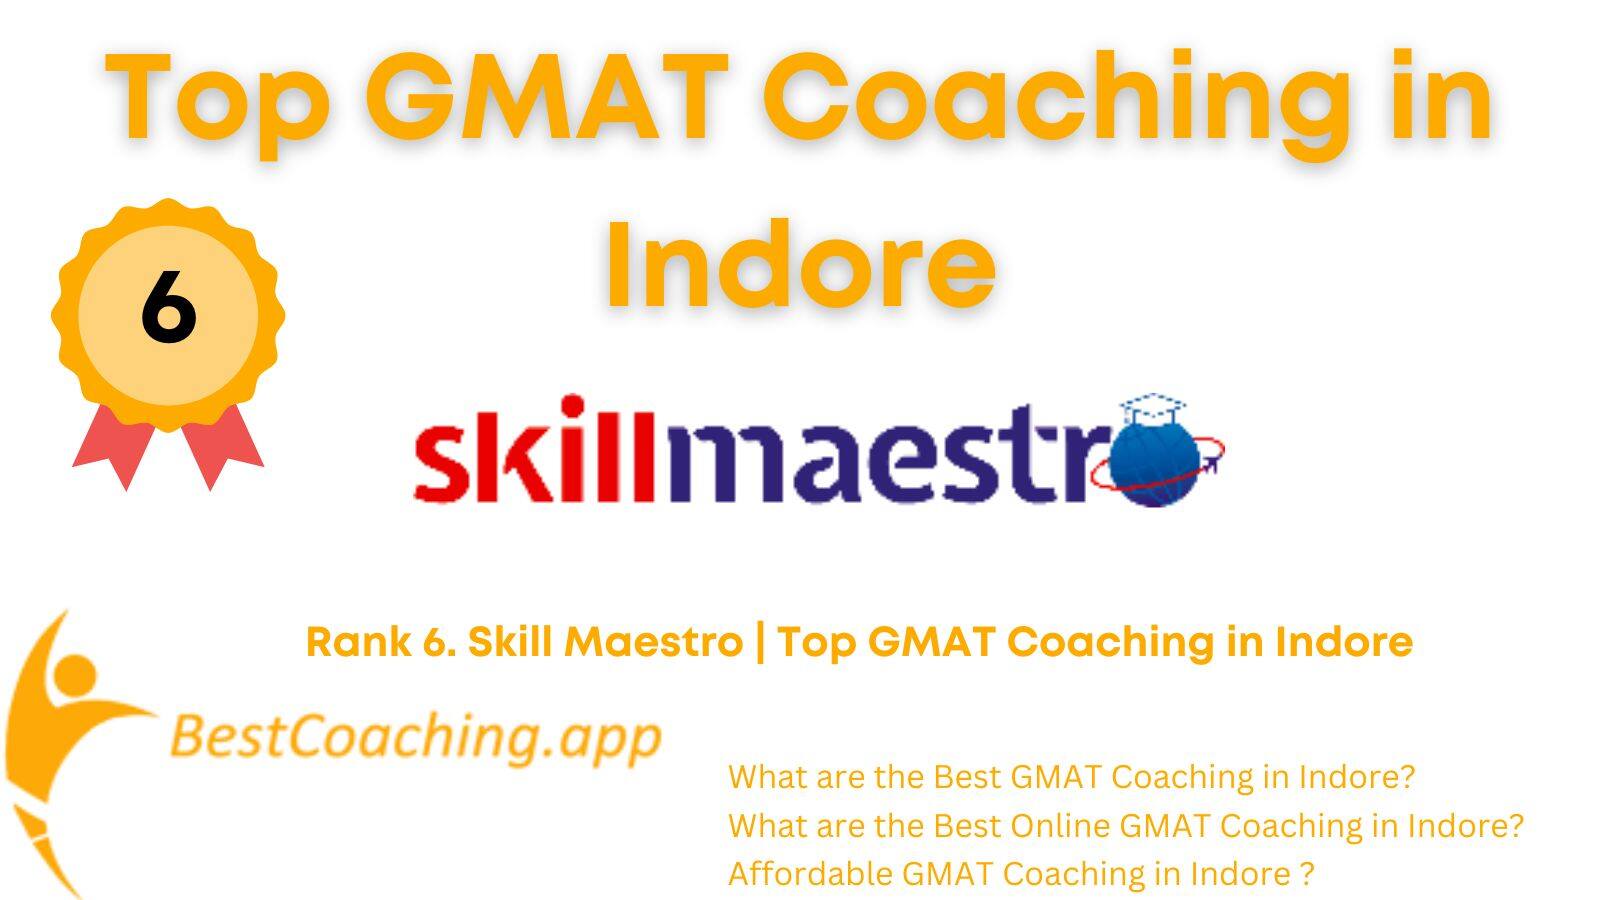 Rank 6. Skill Maestro | Top GMAT Coaching in Indore